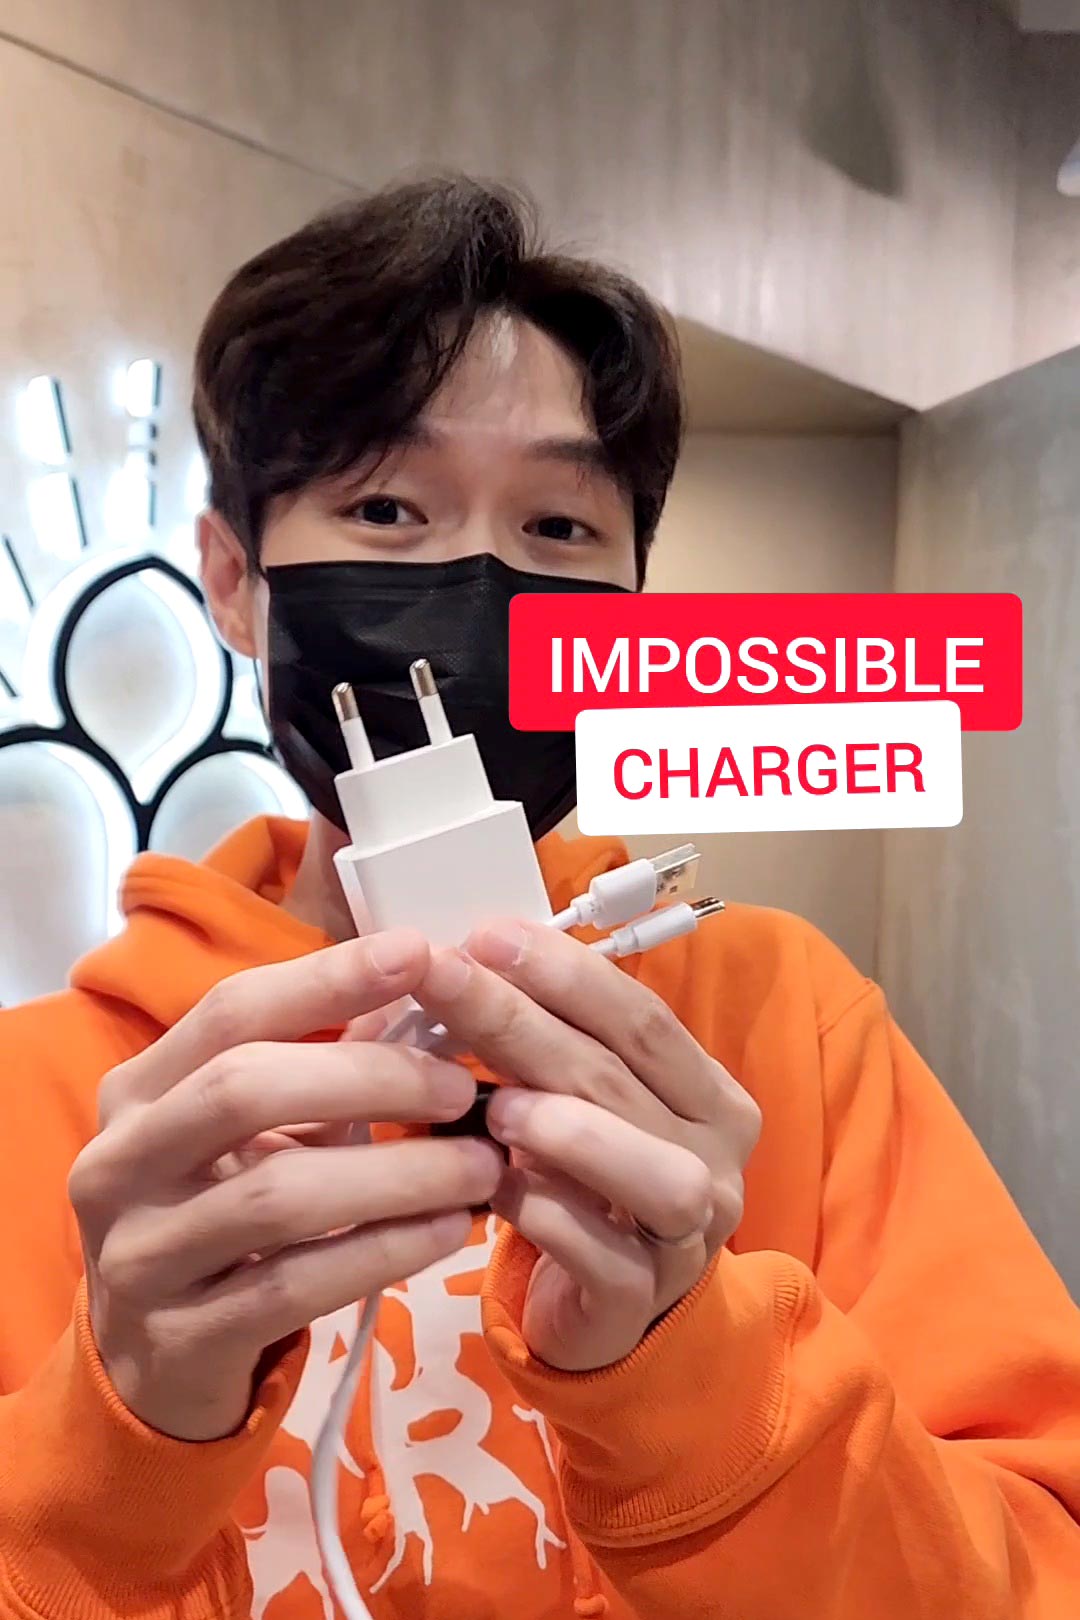 How does it work? The Impossible Charger